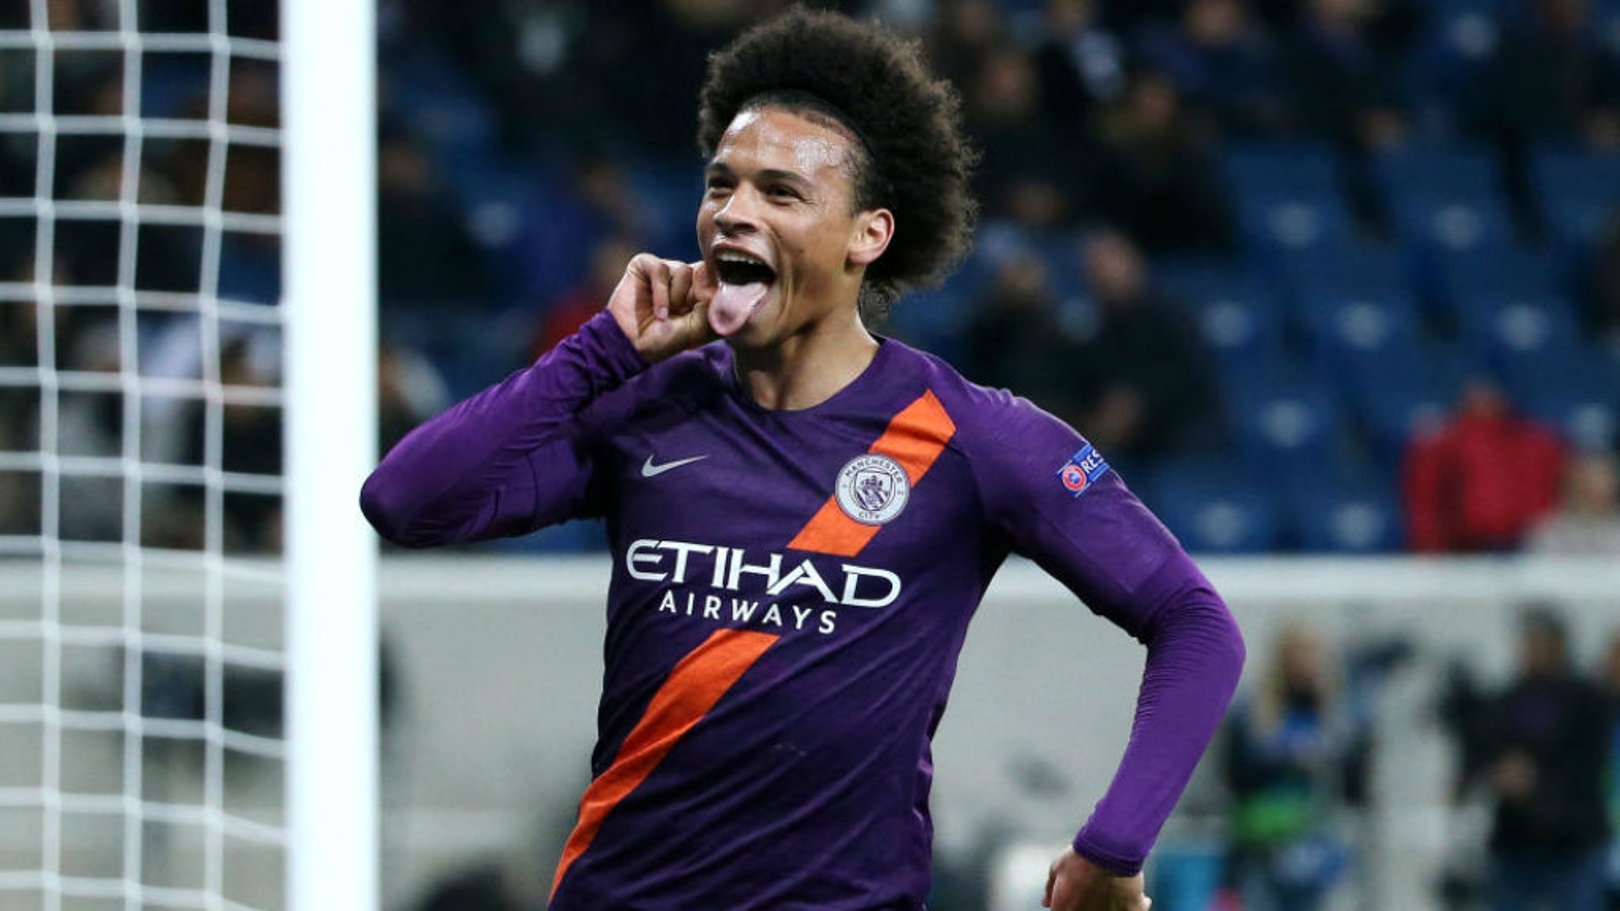 ALL SMILES: Leroy Sane's reaction says it all after David Silva's late winner